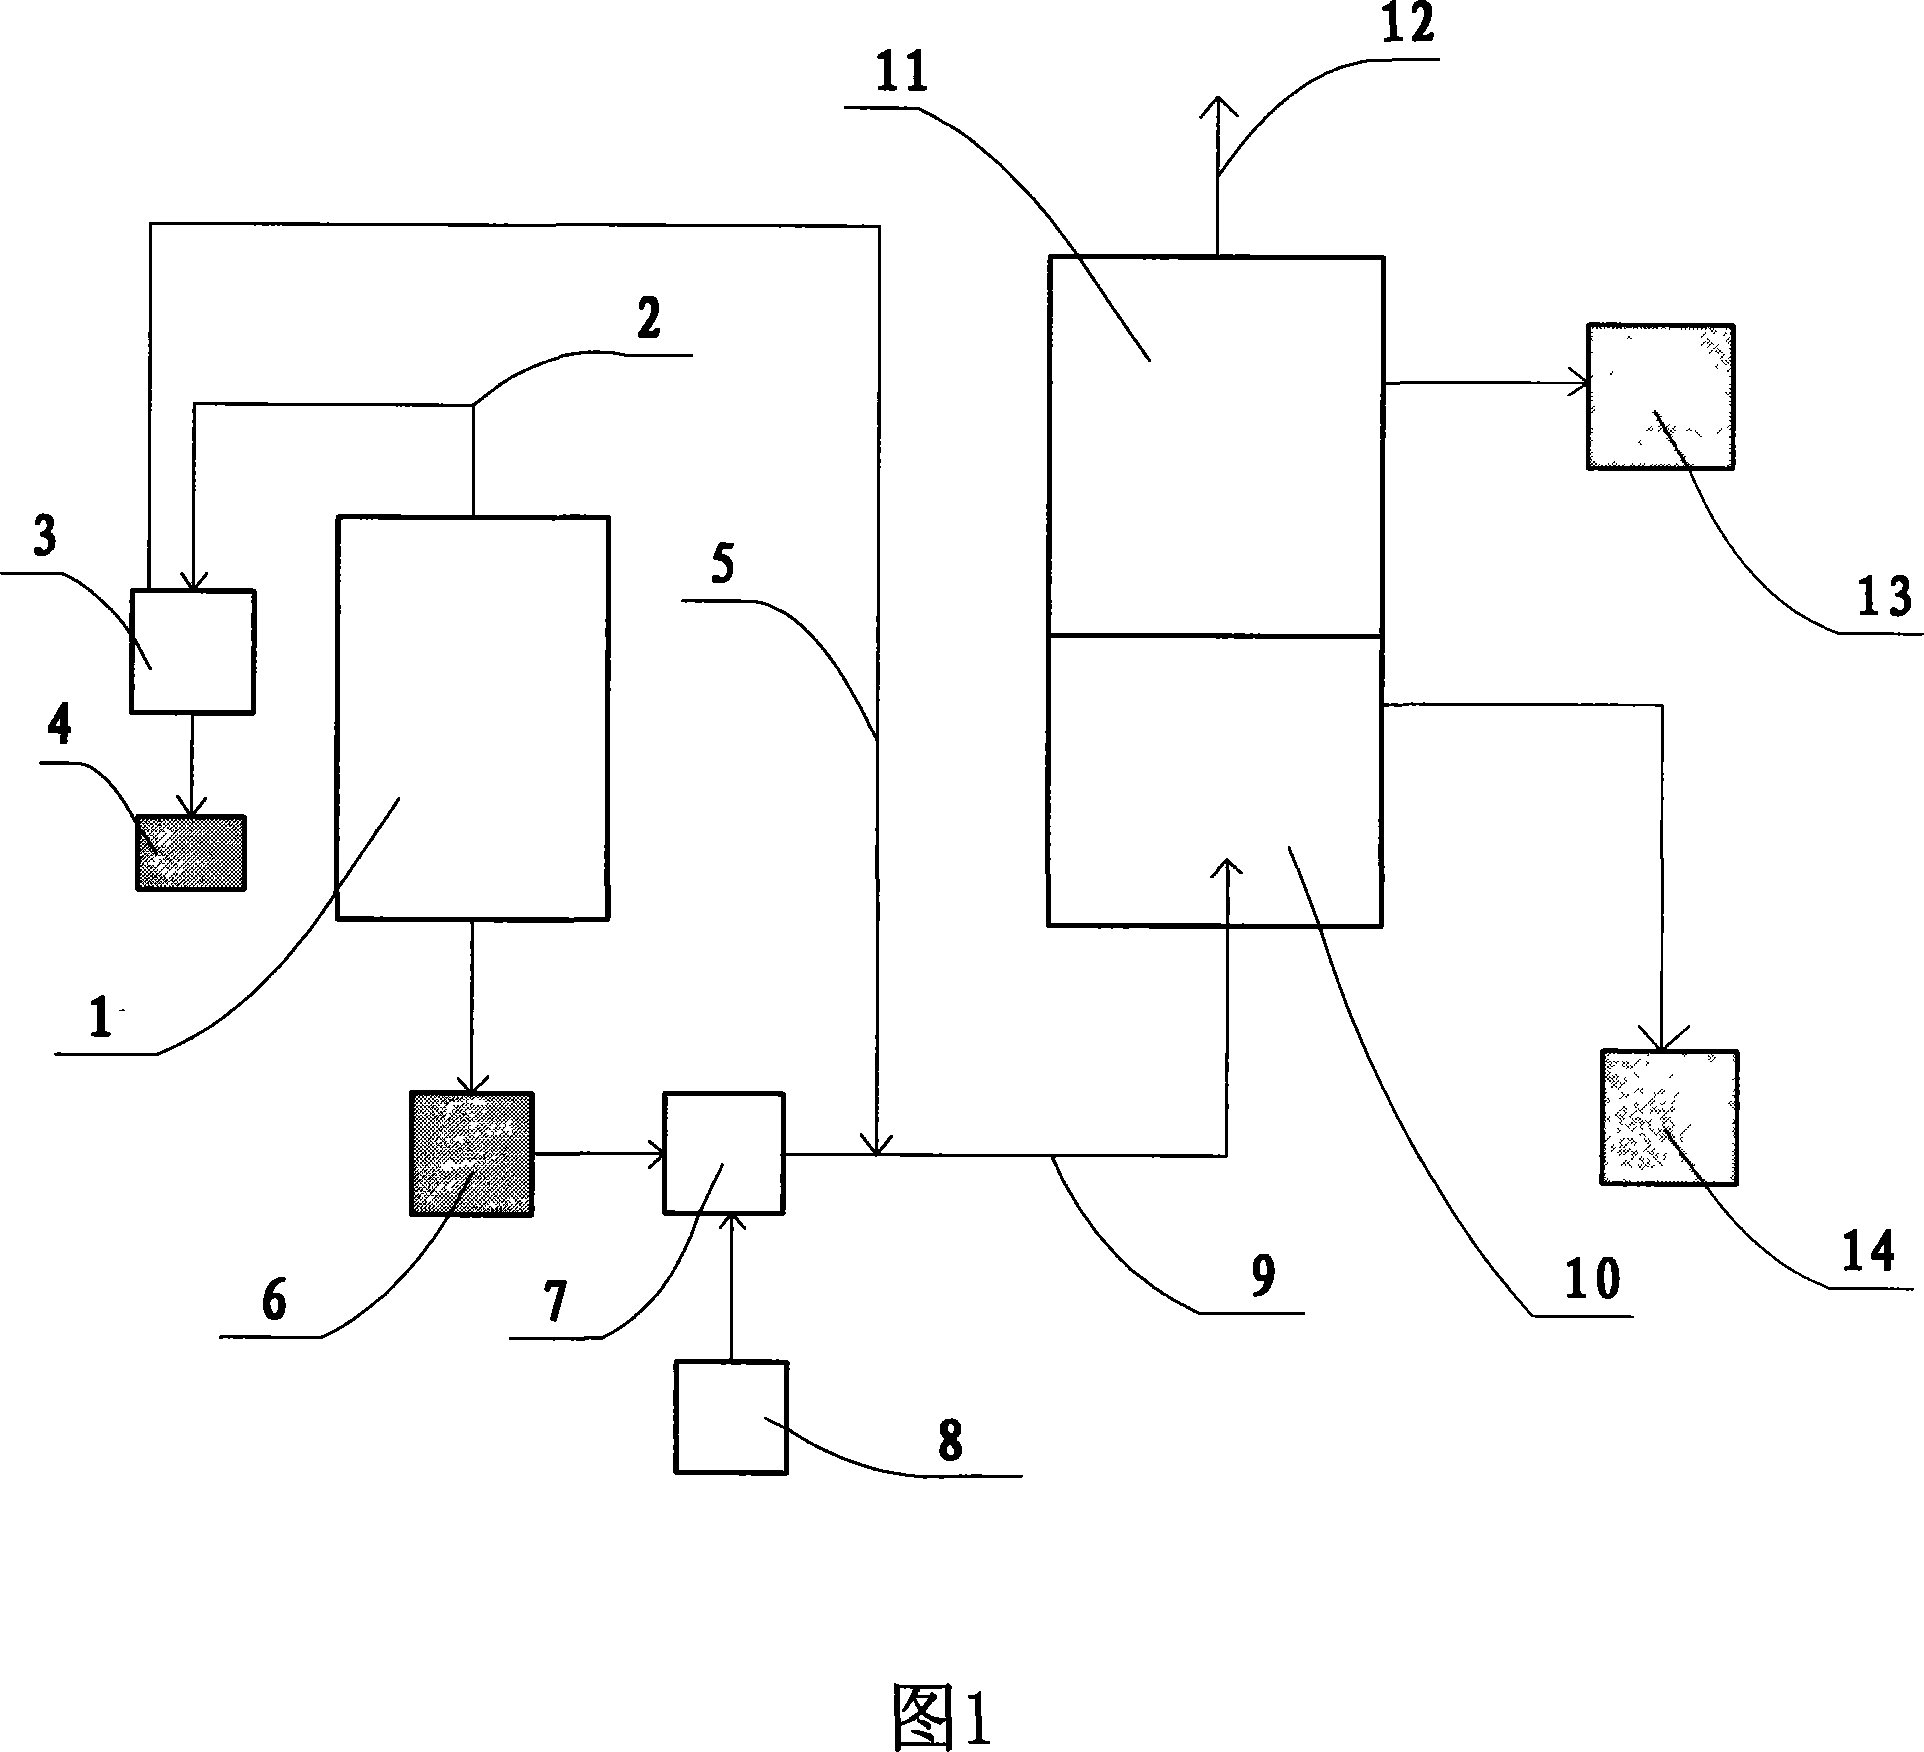 Method for generating power and producing cement clinker from oil shale slag and combustible gas